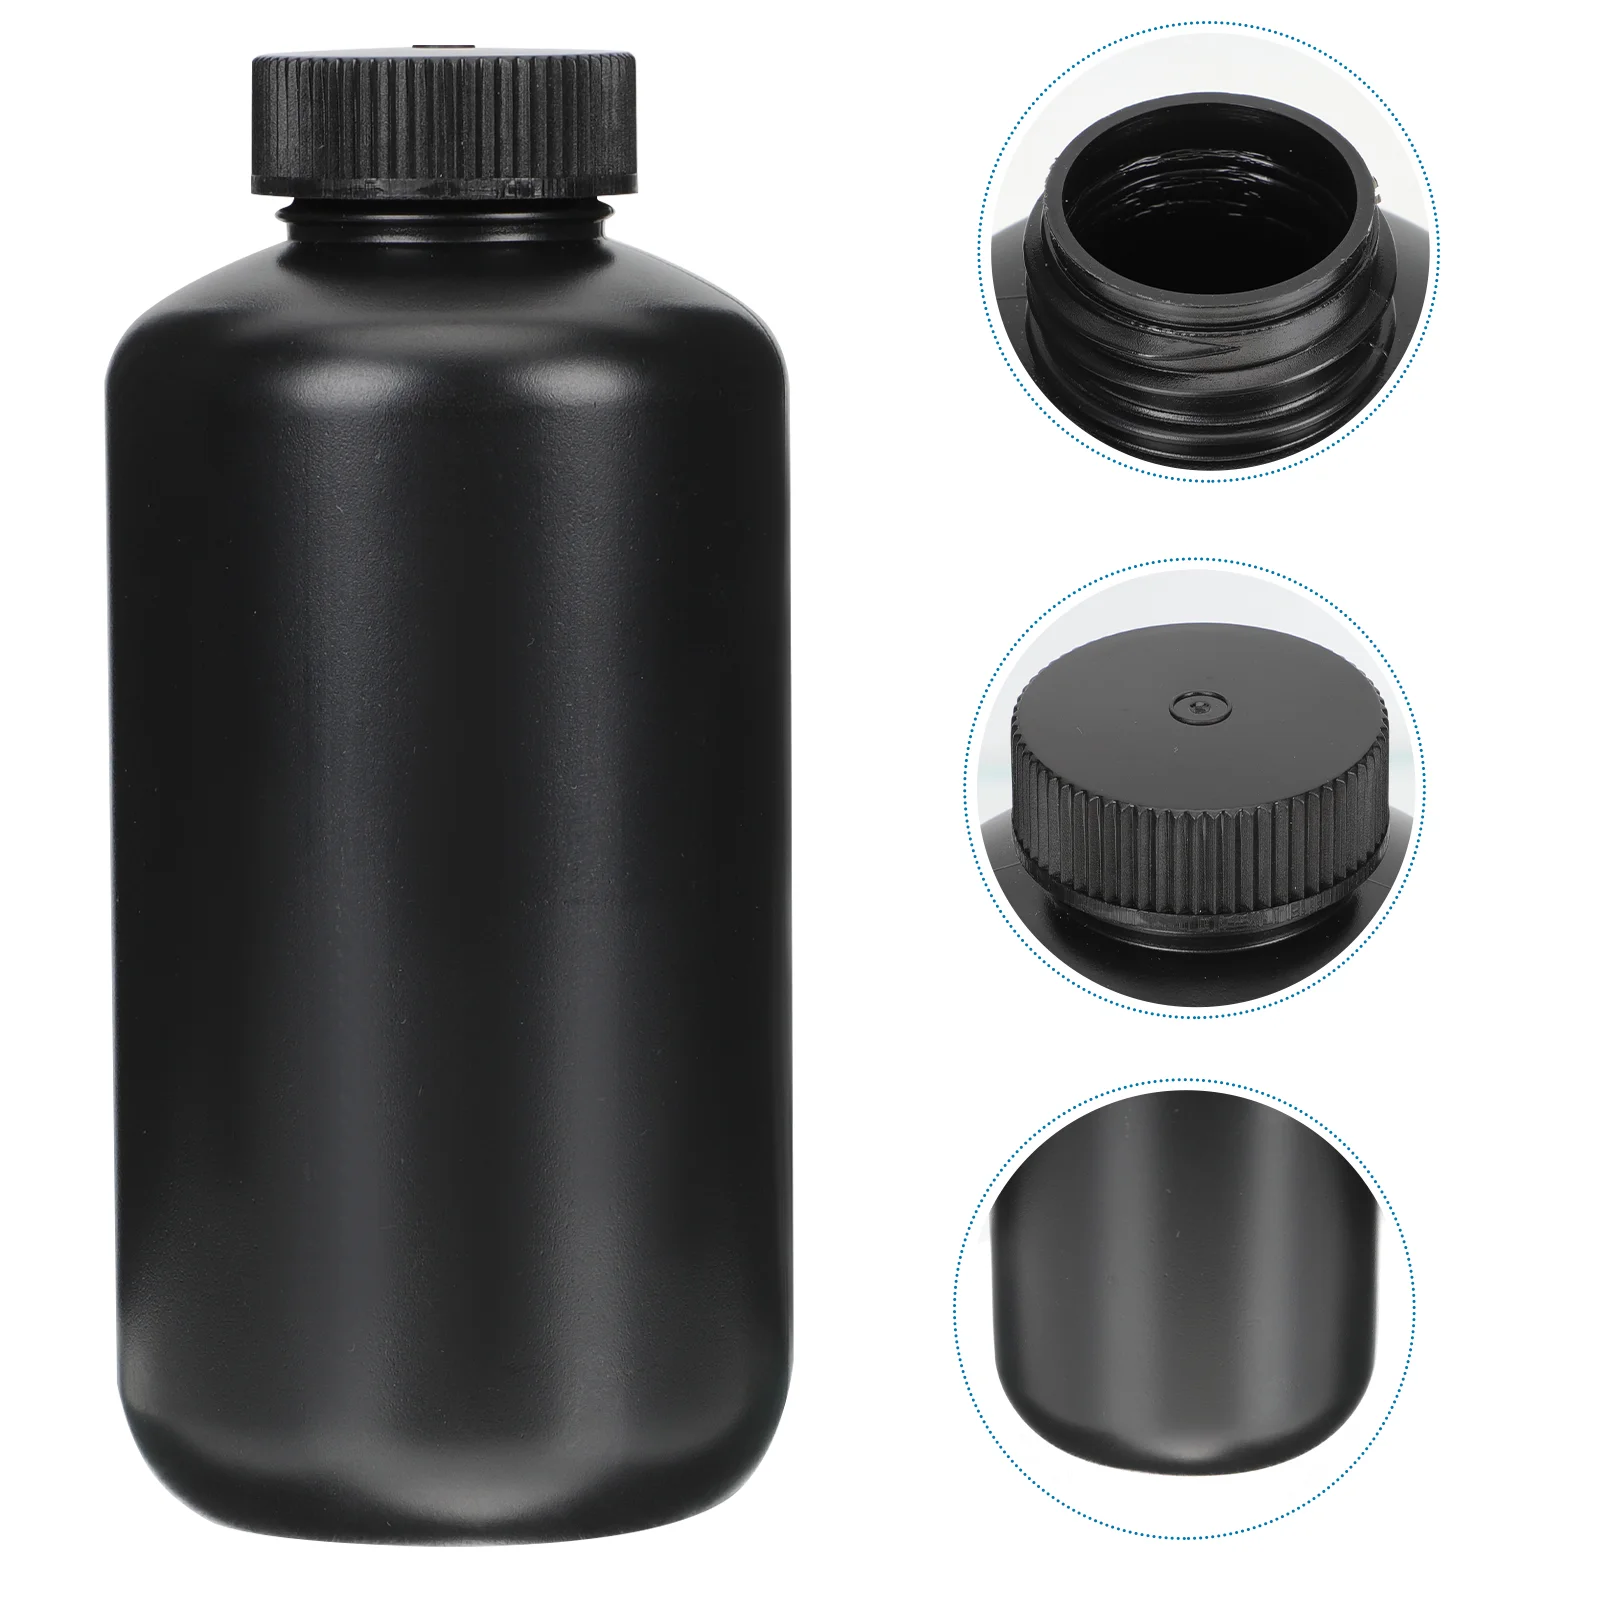 

Narrow Mouth Shade Bottle Plastic Container Reagent Storage Organizer Squirt Bottles Liquids Vial Empty 500ml Media